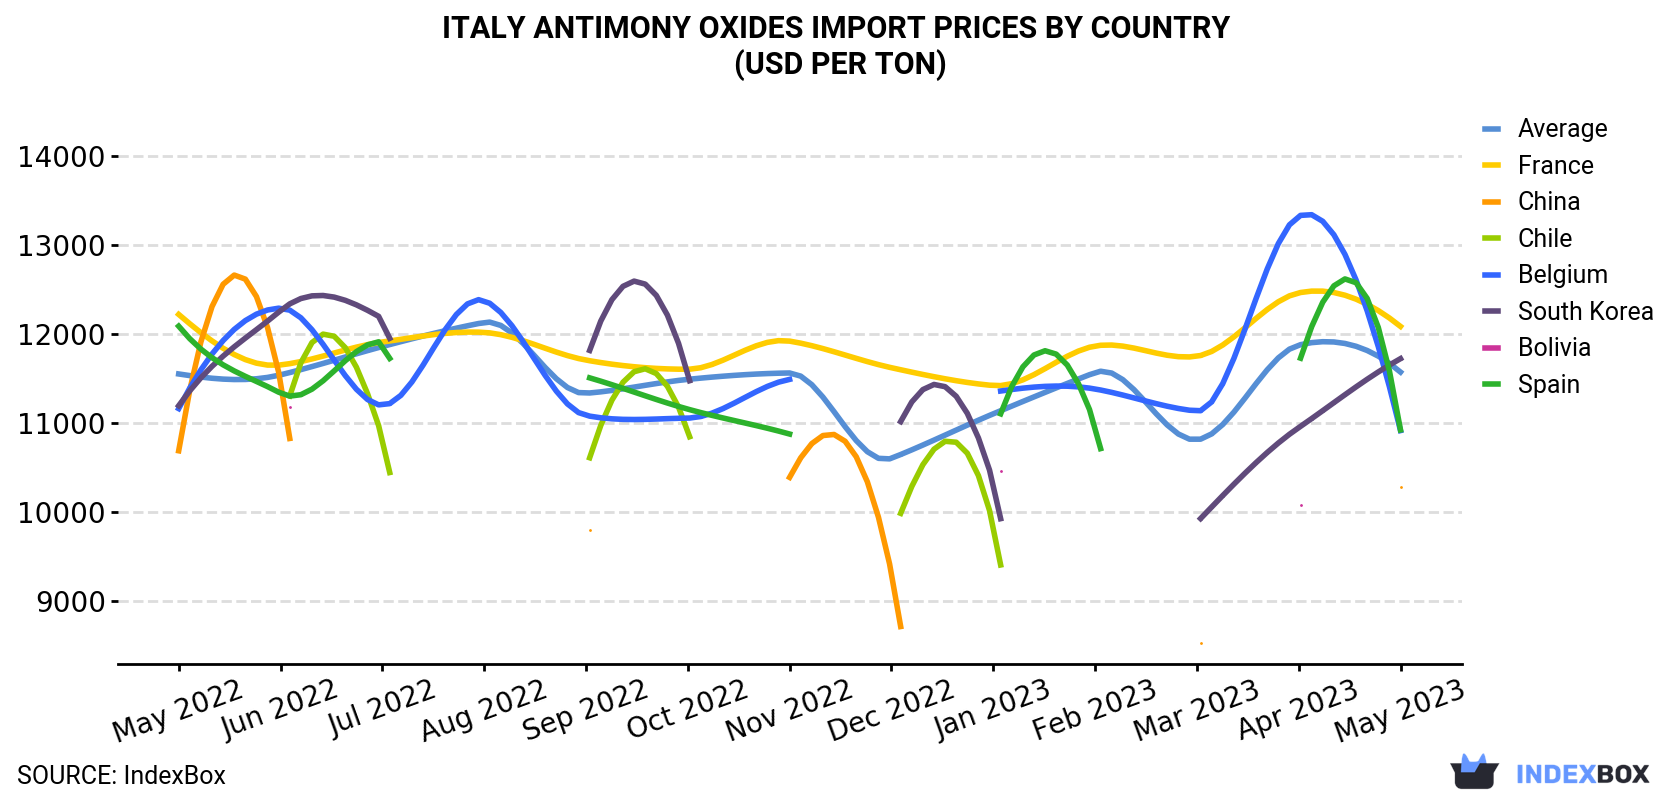 Italy Antimony Oxides Import Prices By Country (USD Per Ton)